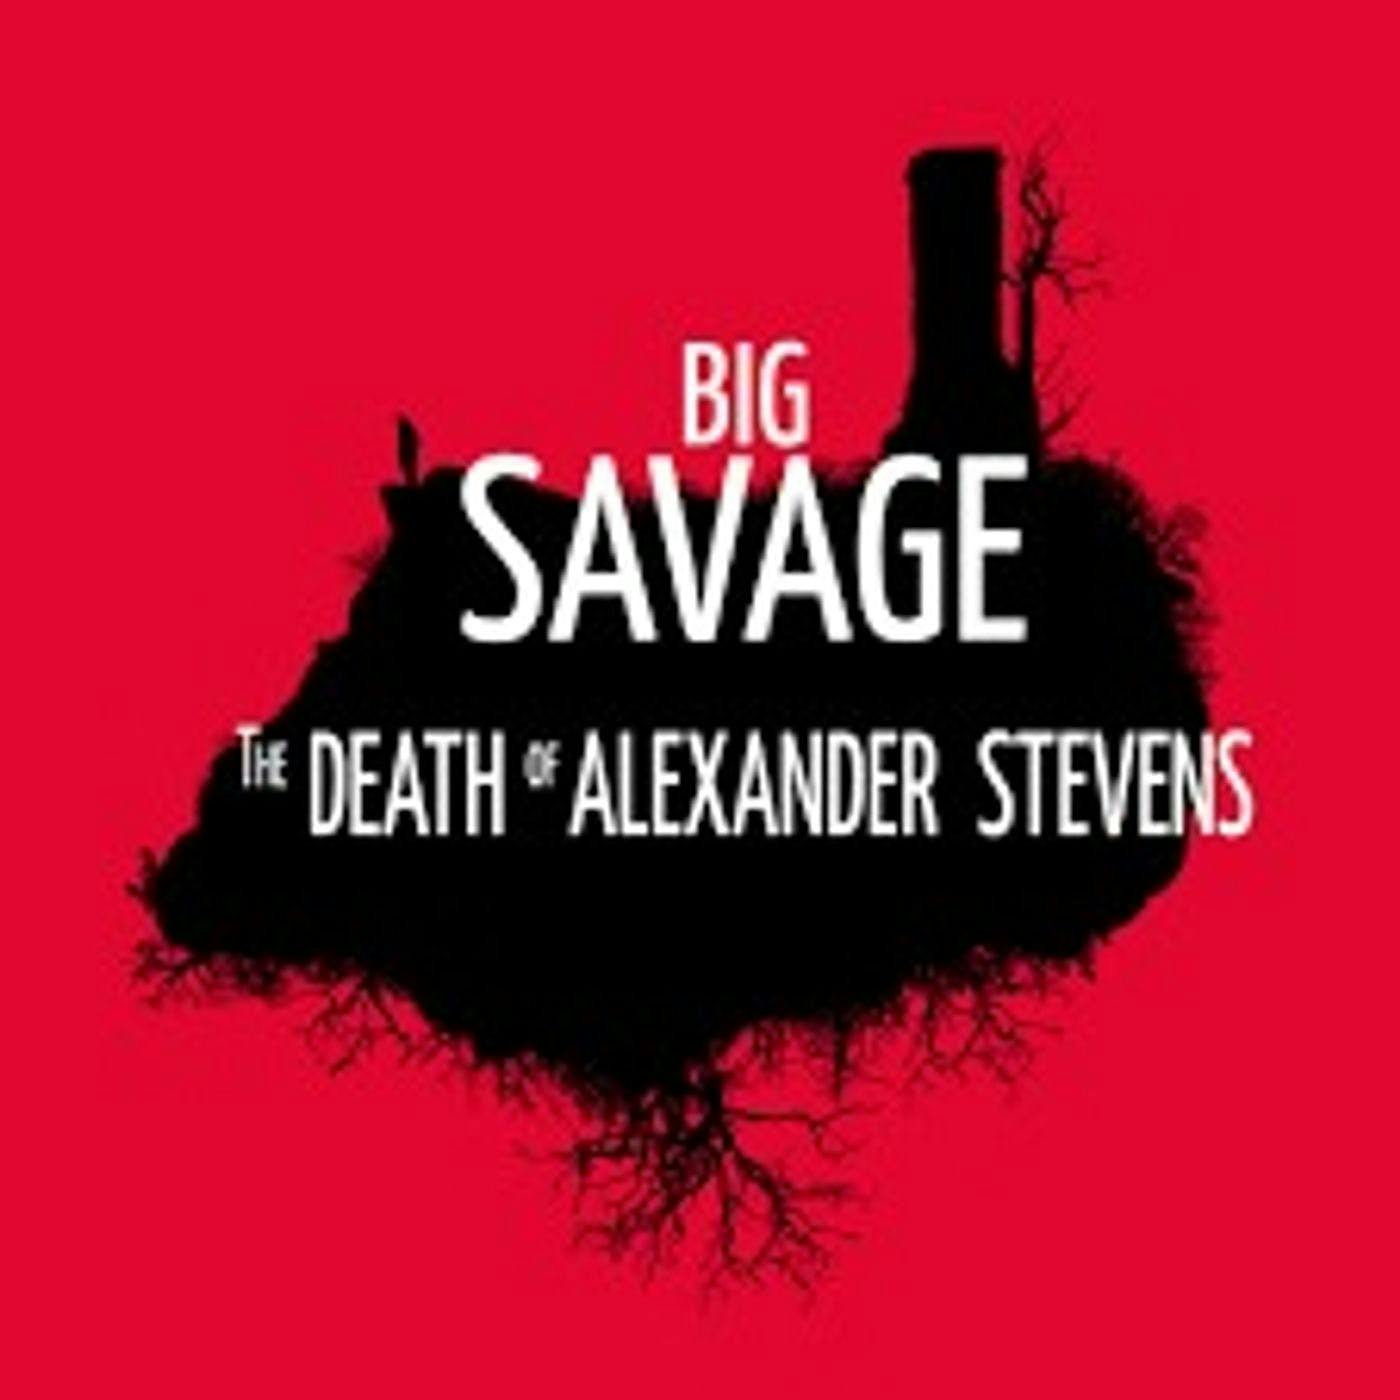 A Significant Event | Big Savage: The Death of Alexander Stevens